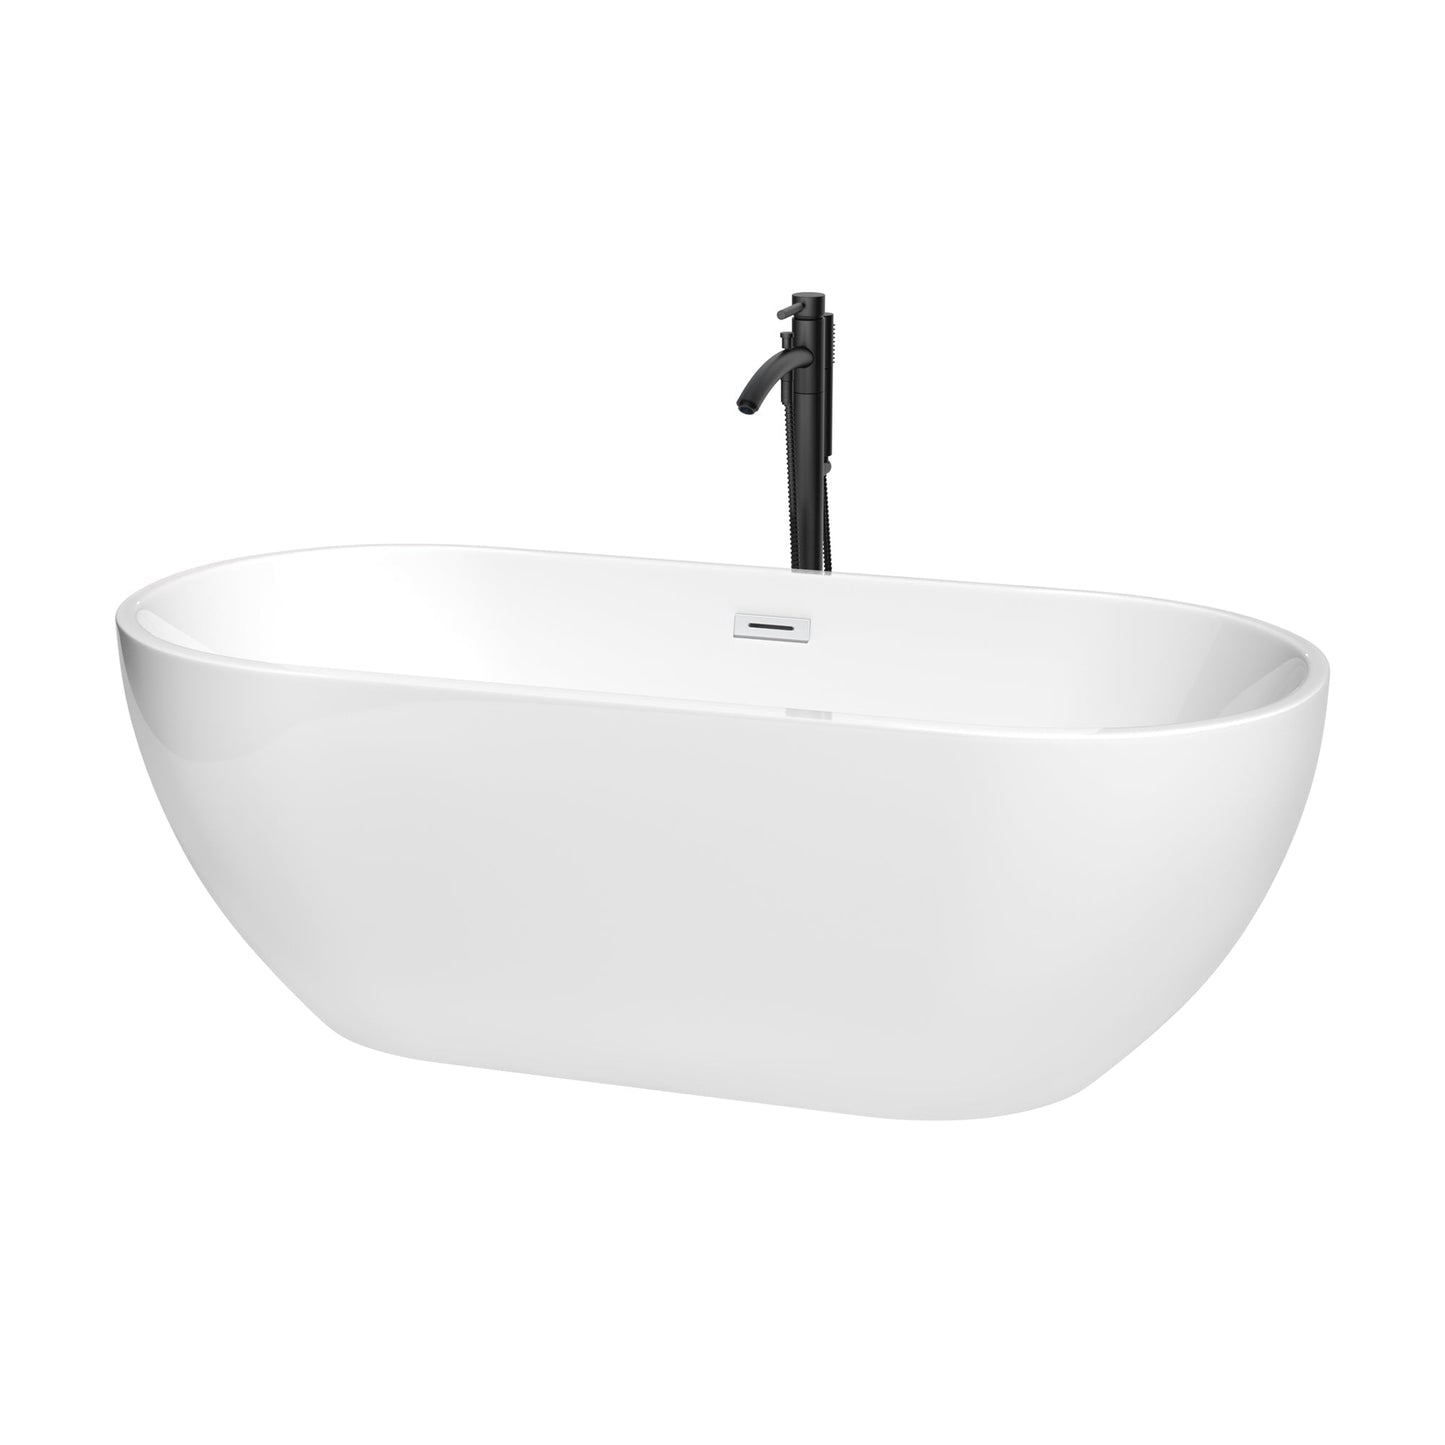 Wyndham Collection Brooklyn 67" Freestanding Bathtub in White With Shiny White Trim and Floor Mounted Faucet in Matte Black